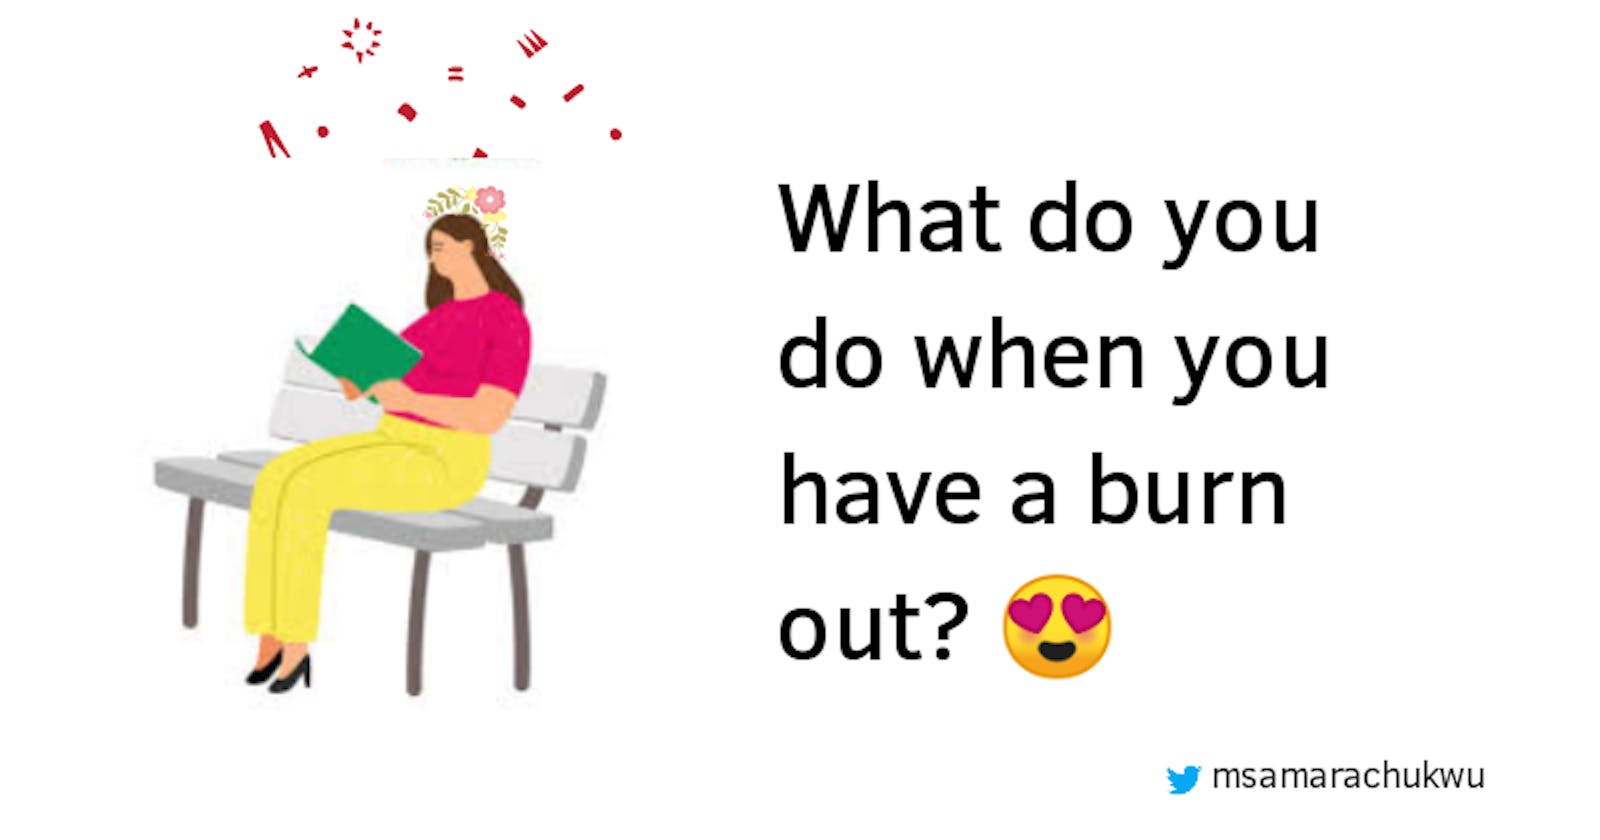 What do you do when you have a burn out?